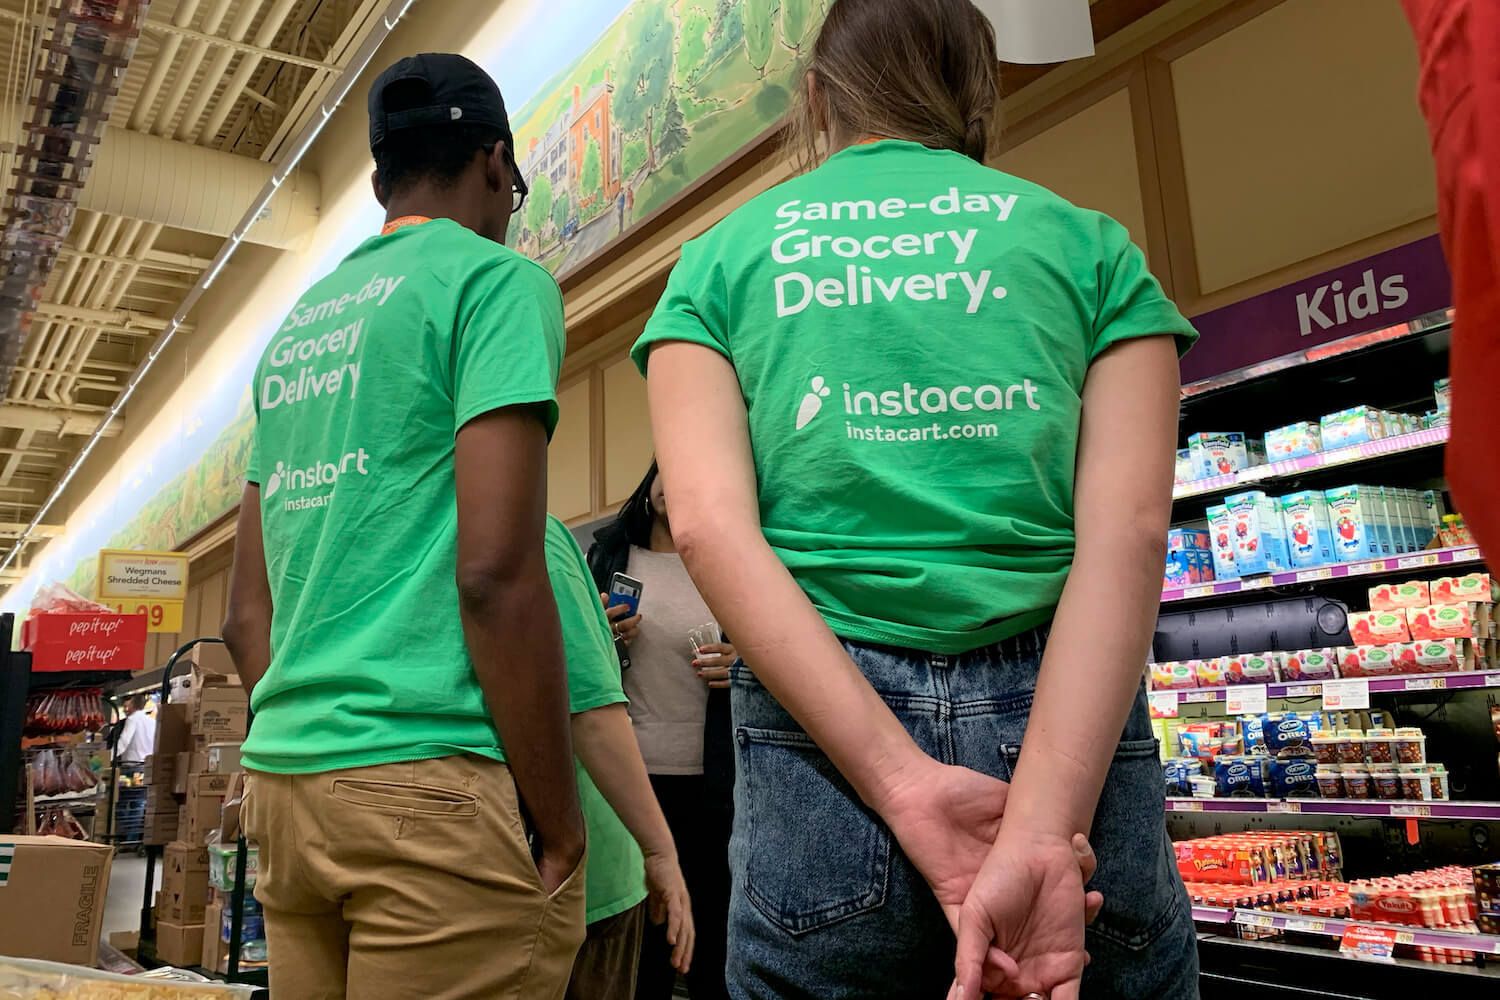 Two gig economy Instacart workers face their backs to the camera inside a grocery store. January 2021